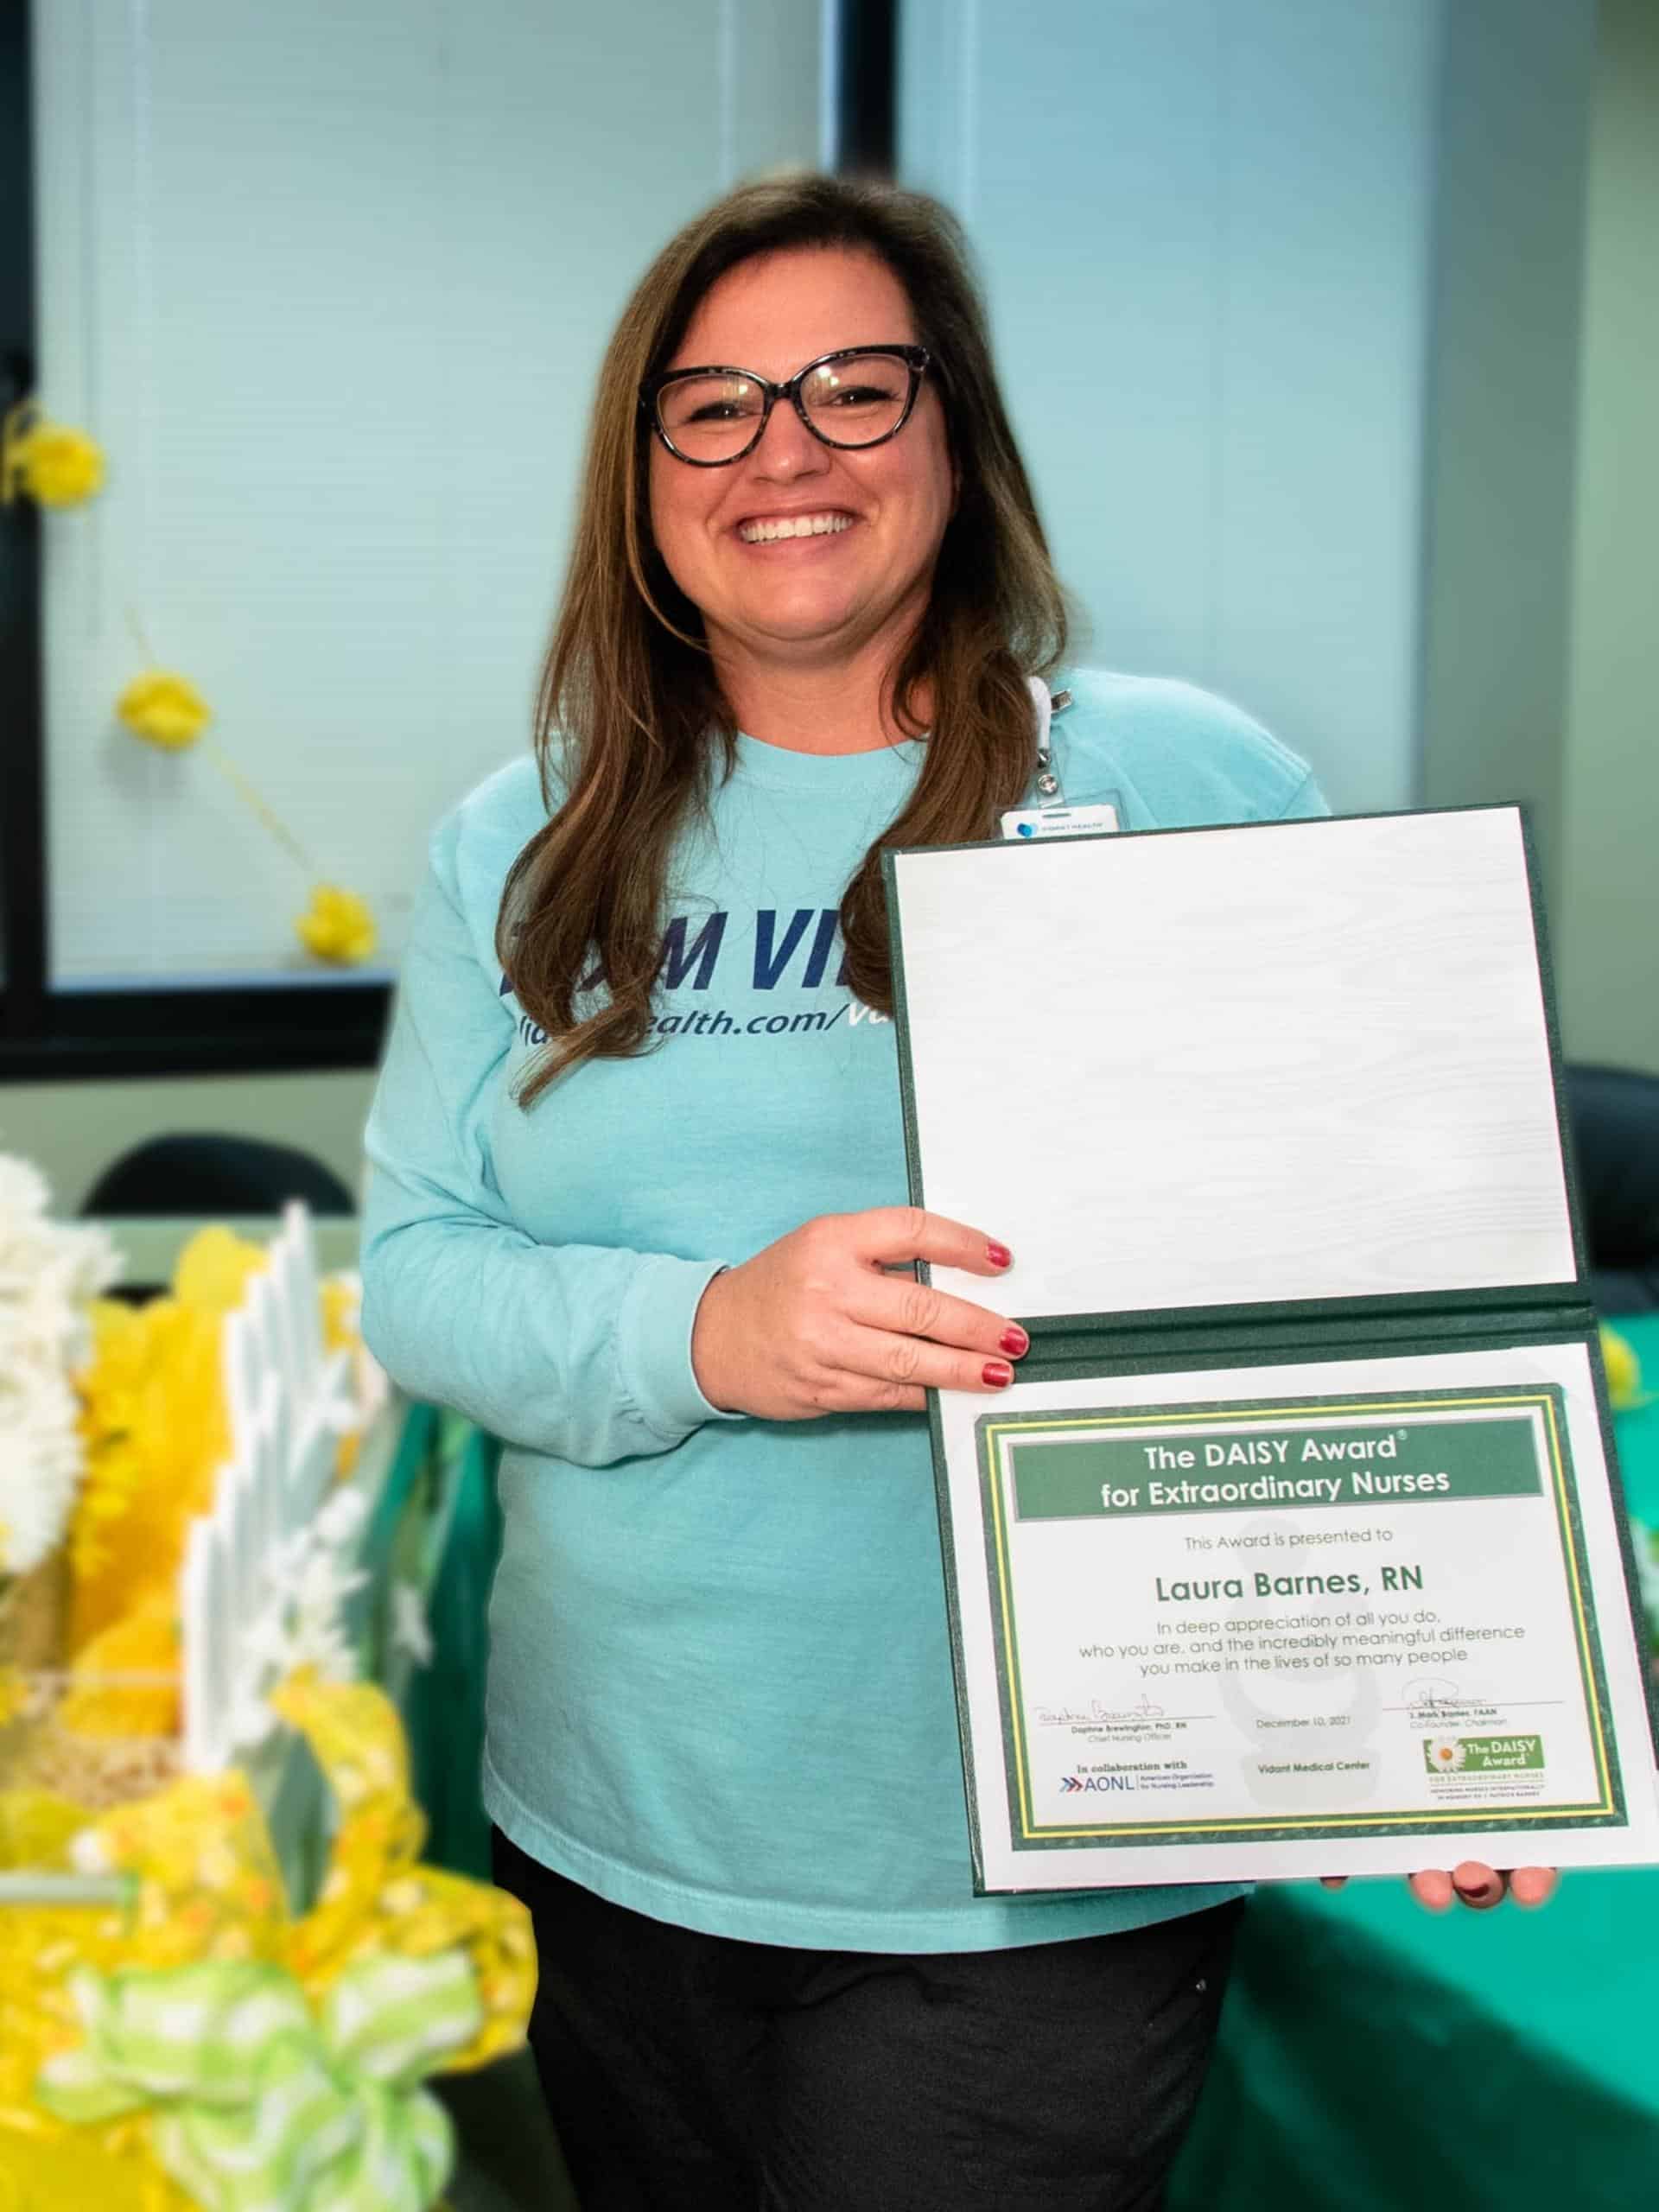 Laura Barnes receives daisy award in the fourth quarter of 2021